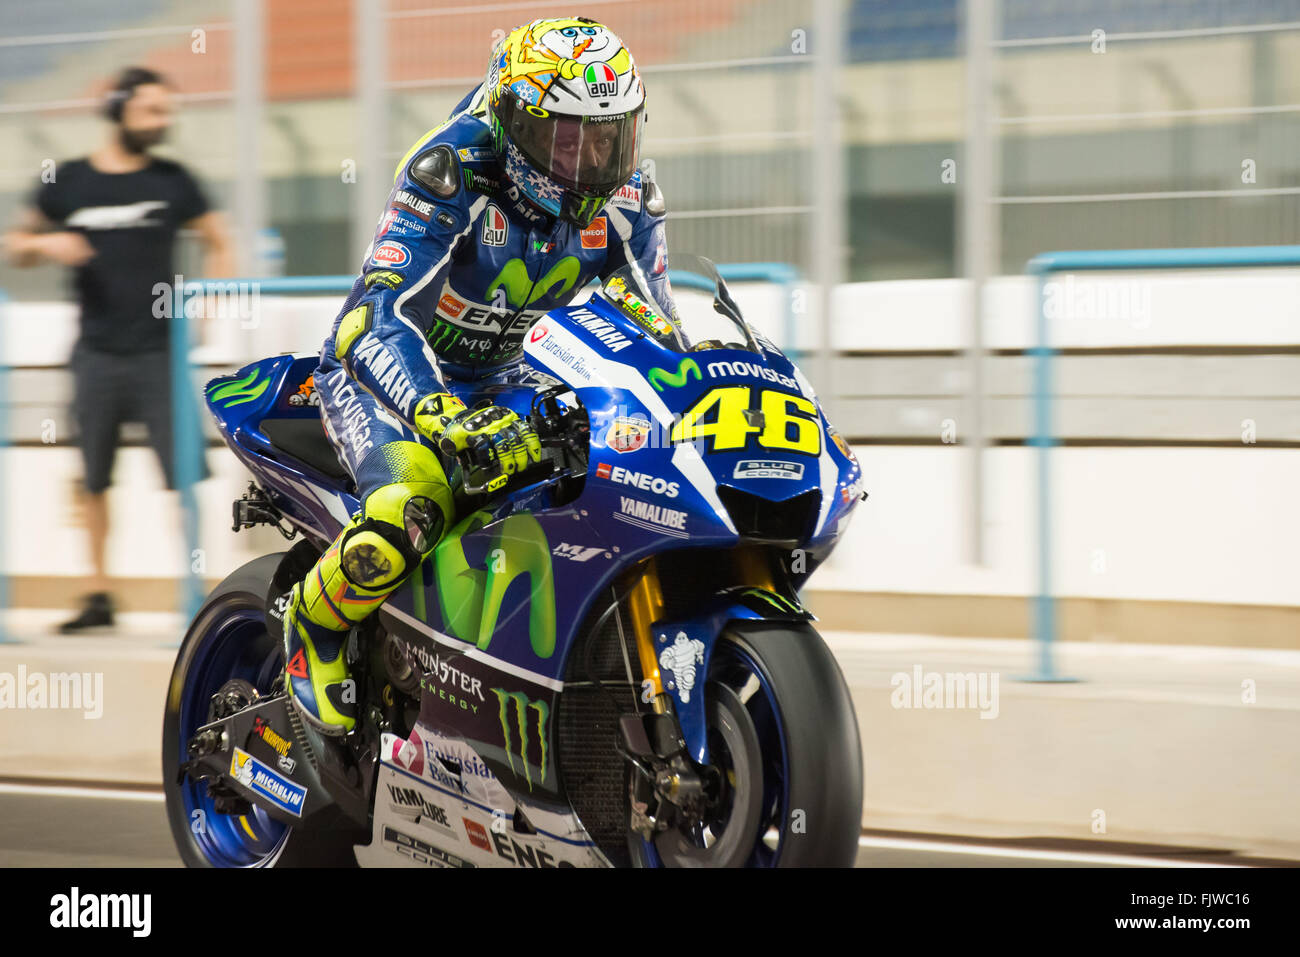 Doha, Qatar. 3rd March, 2016. Valentino Rossi rides down the pit lane  during the second day of the final pre-season test for the 2016 FIM MotoGP  World Championship at Losail International Circuit